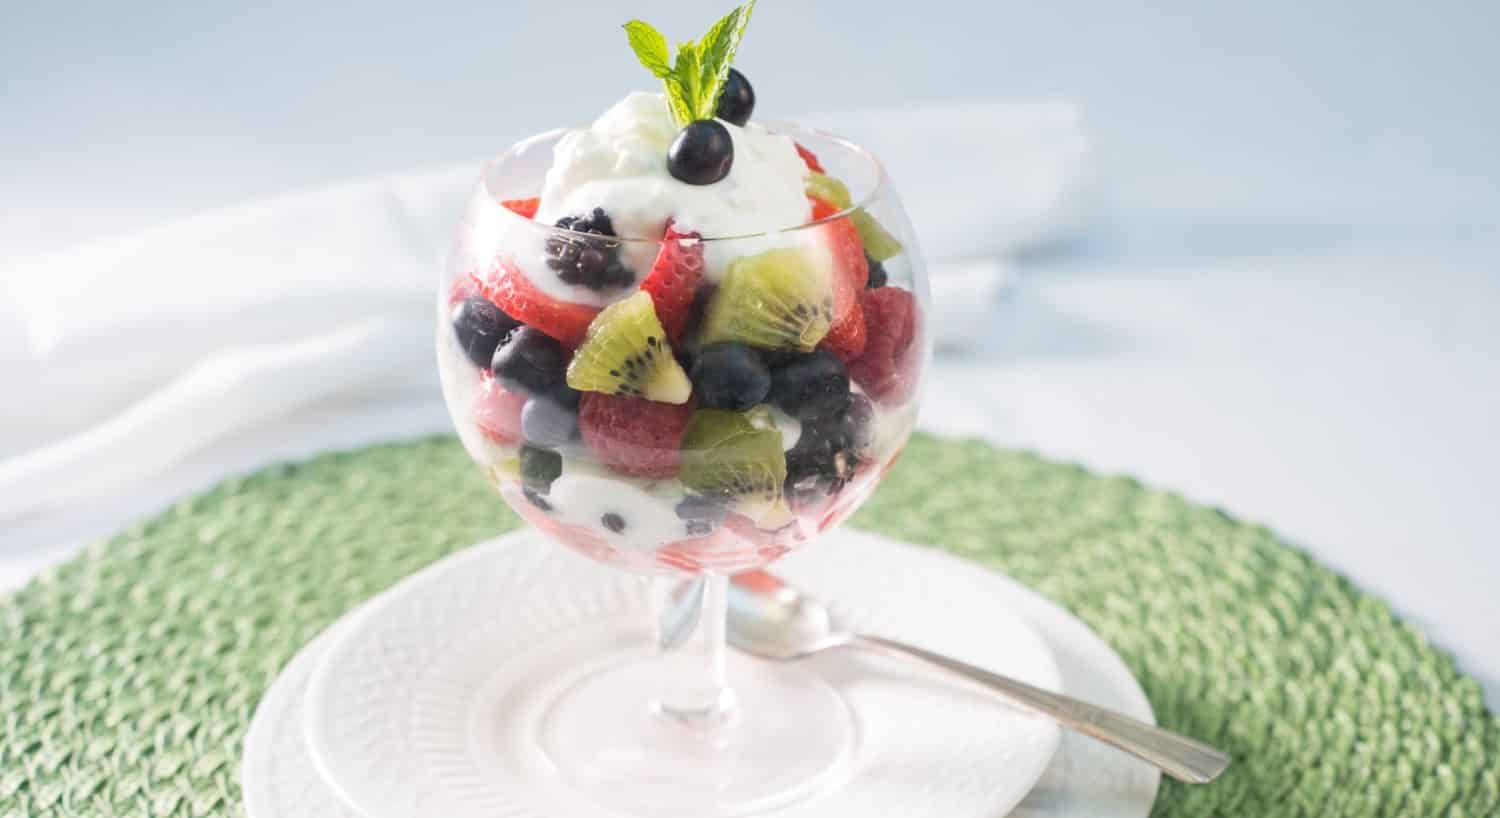 Glass fruit cup sitting on white porcelain plate filled with layers of yogurt, kiwi, strawberries, blackberries, and blueberries